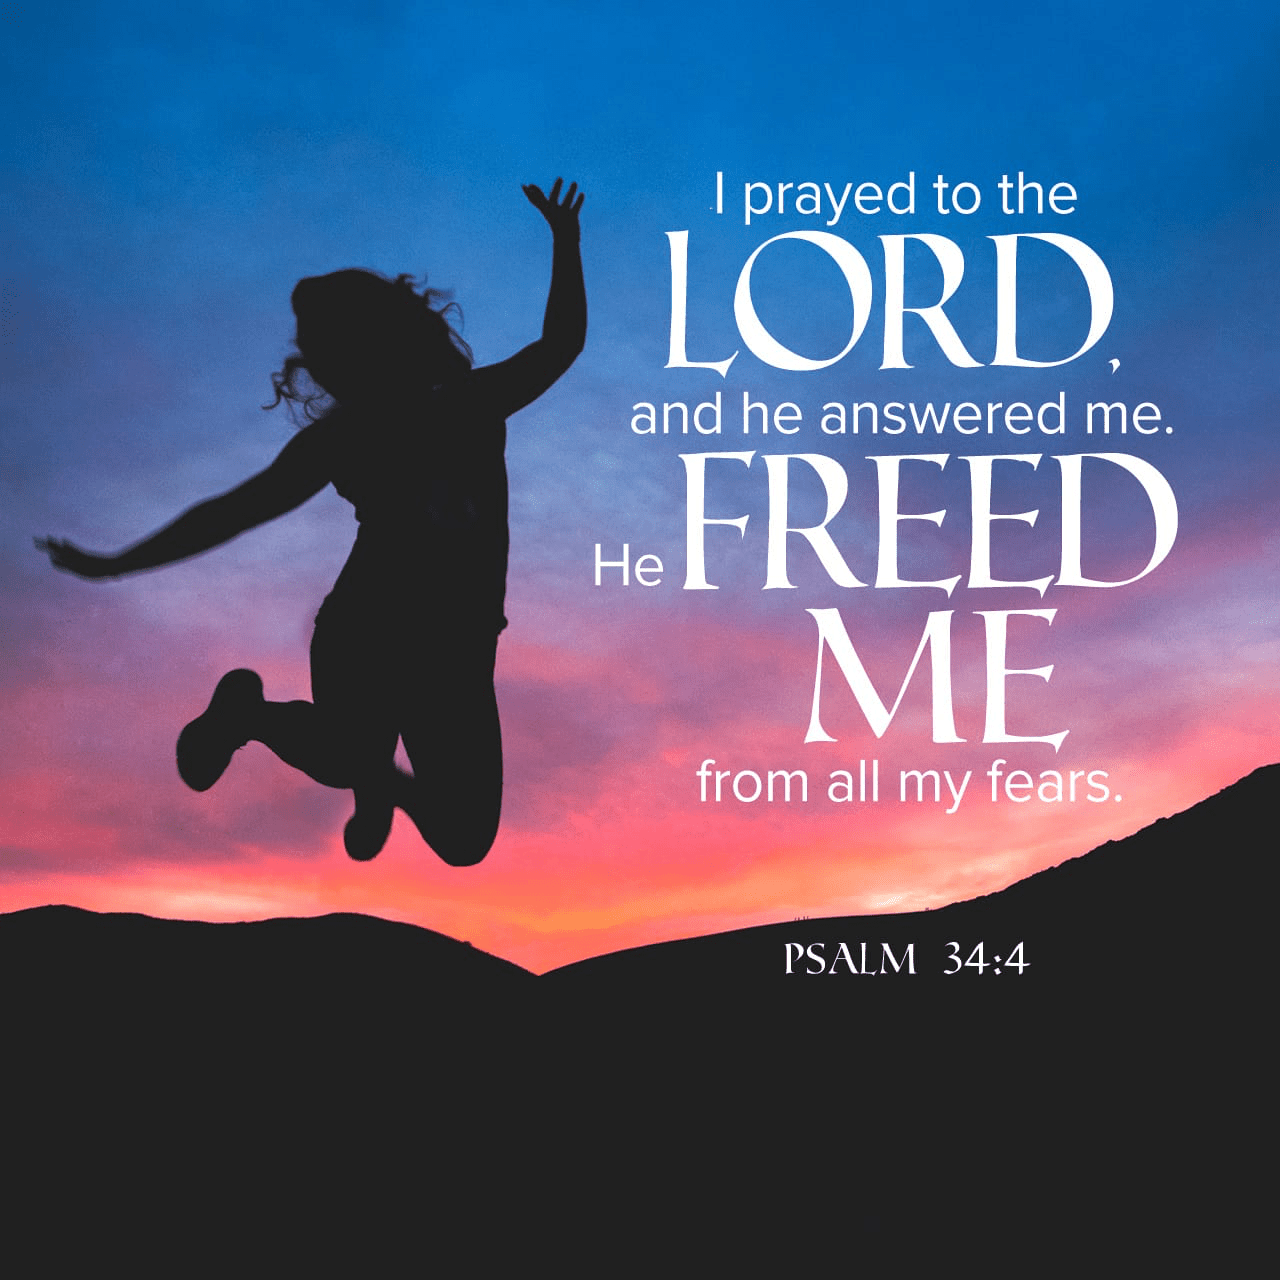 VOTD April 15 - “I sought the LORD, and He answered me, And delivered me from all my fears.” ‭‭Psalms‬ ‭34:4‬ ‭NASB‬‬